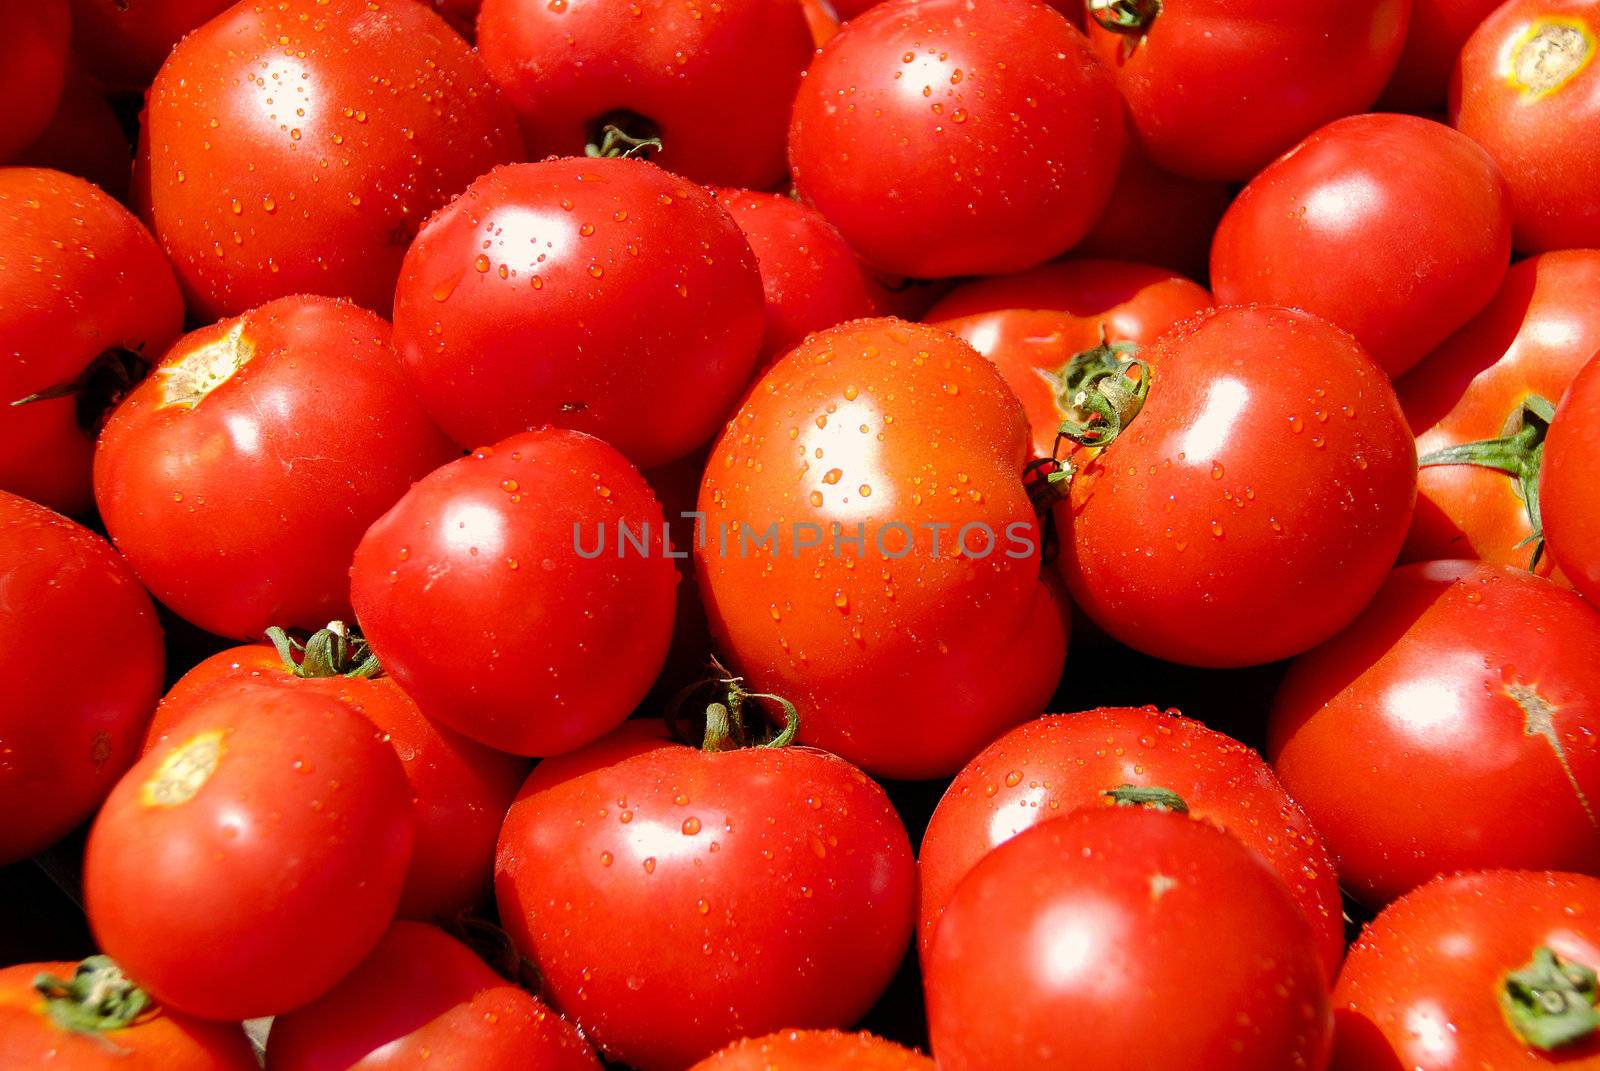 A pile of dewily red tomatoes by hanusst